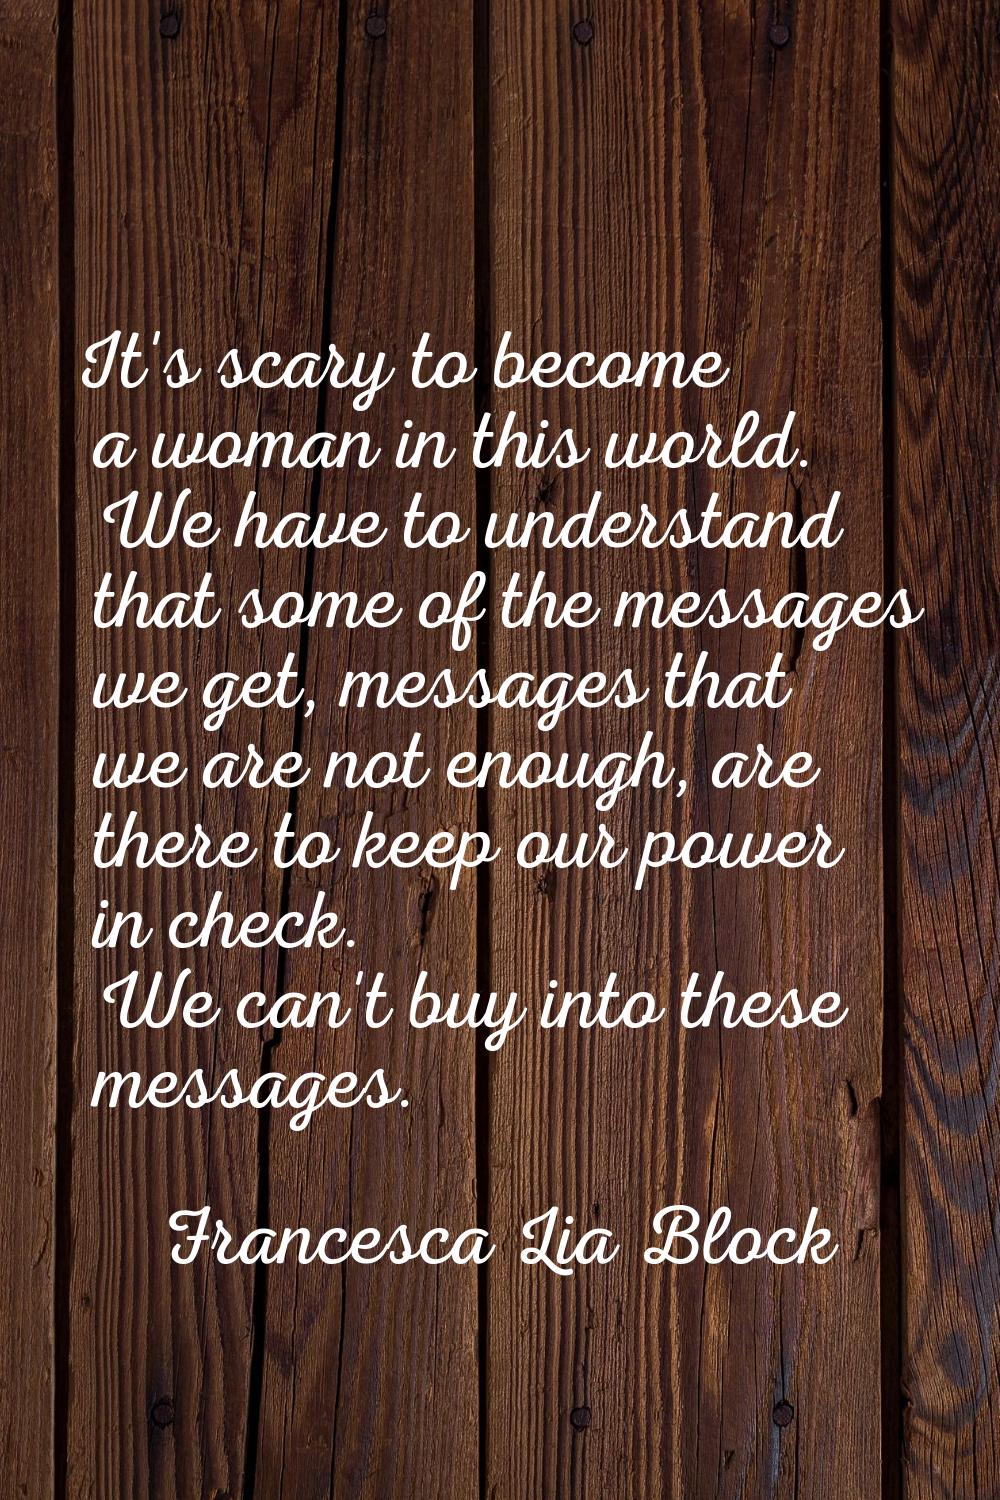 It's scary to become a woman in this world. We have to understand that some of the messages we get,